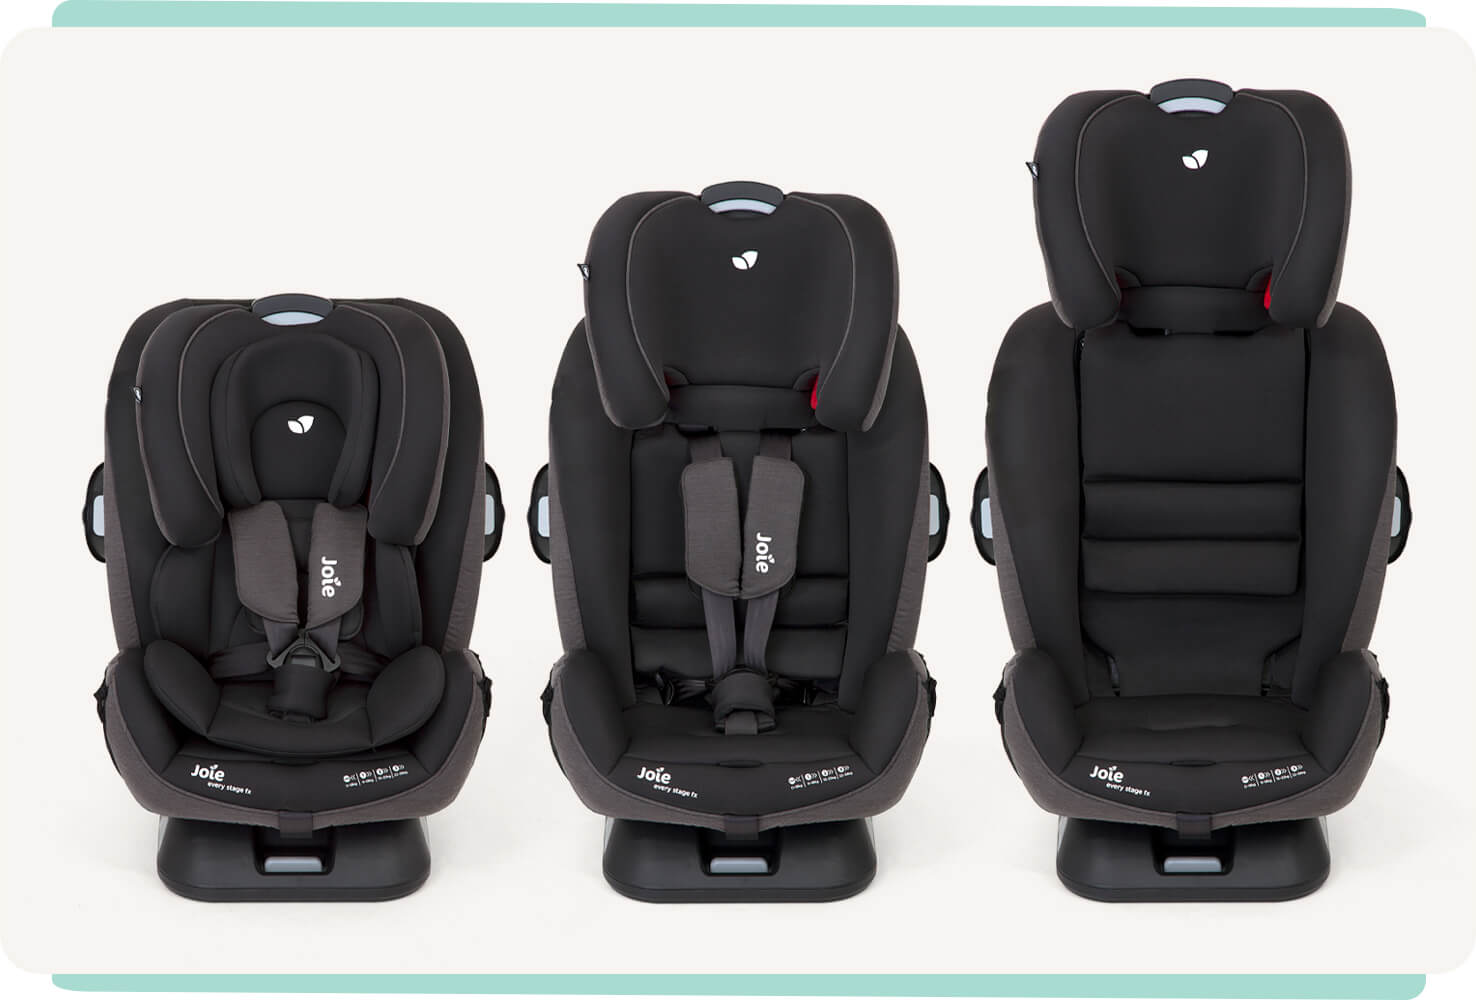 4 children of different ages sitting side by side in gray Joie Every Stage FX car seats: from left to right a baby, young toddler, young child, and older child.